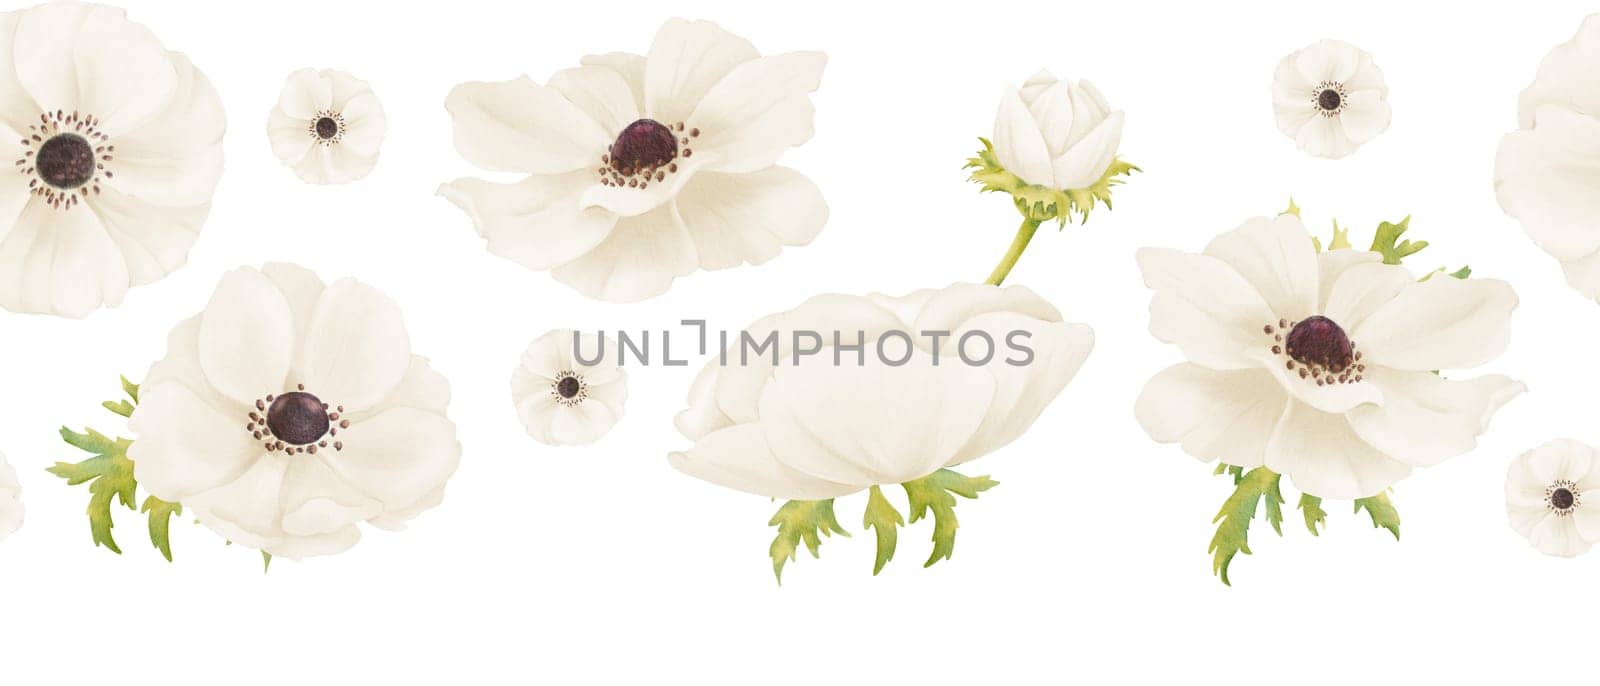 A seamless border featuring delicate white anemones and fresh greenery. watercolor illustration for a wide range of wedding invitations, greeting cards, digital backgrounds or artwork.